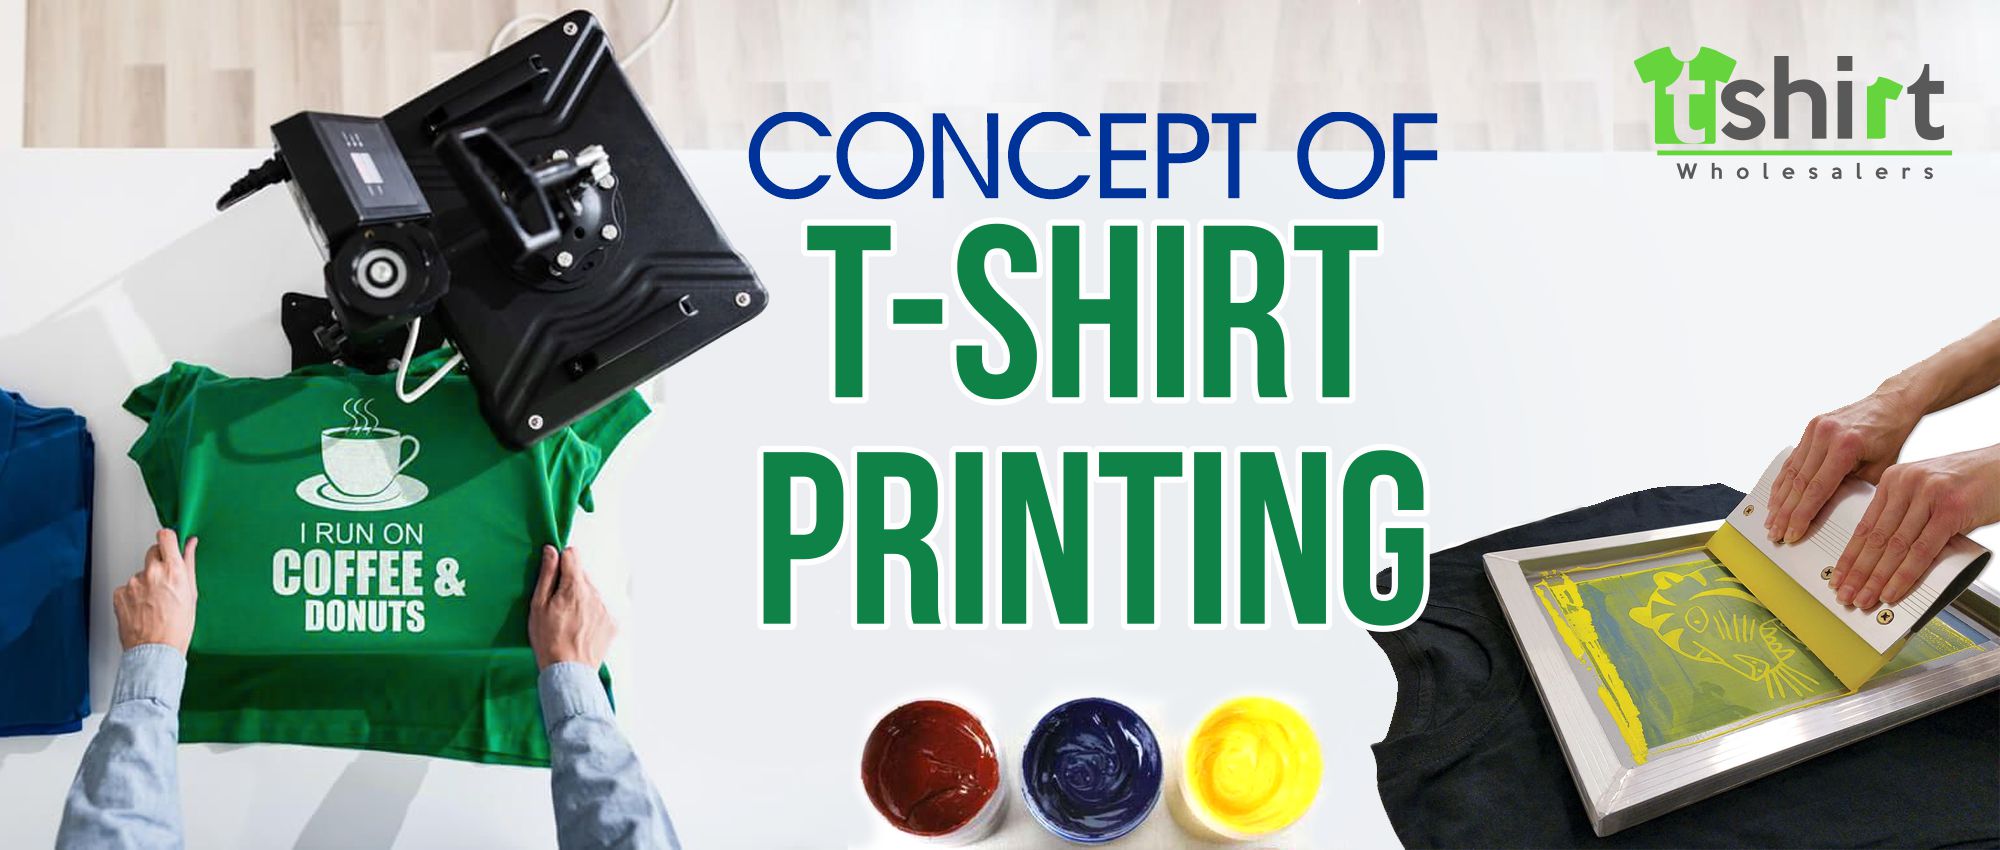 CONCEPT OF T-SHIRT PRINTING